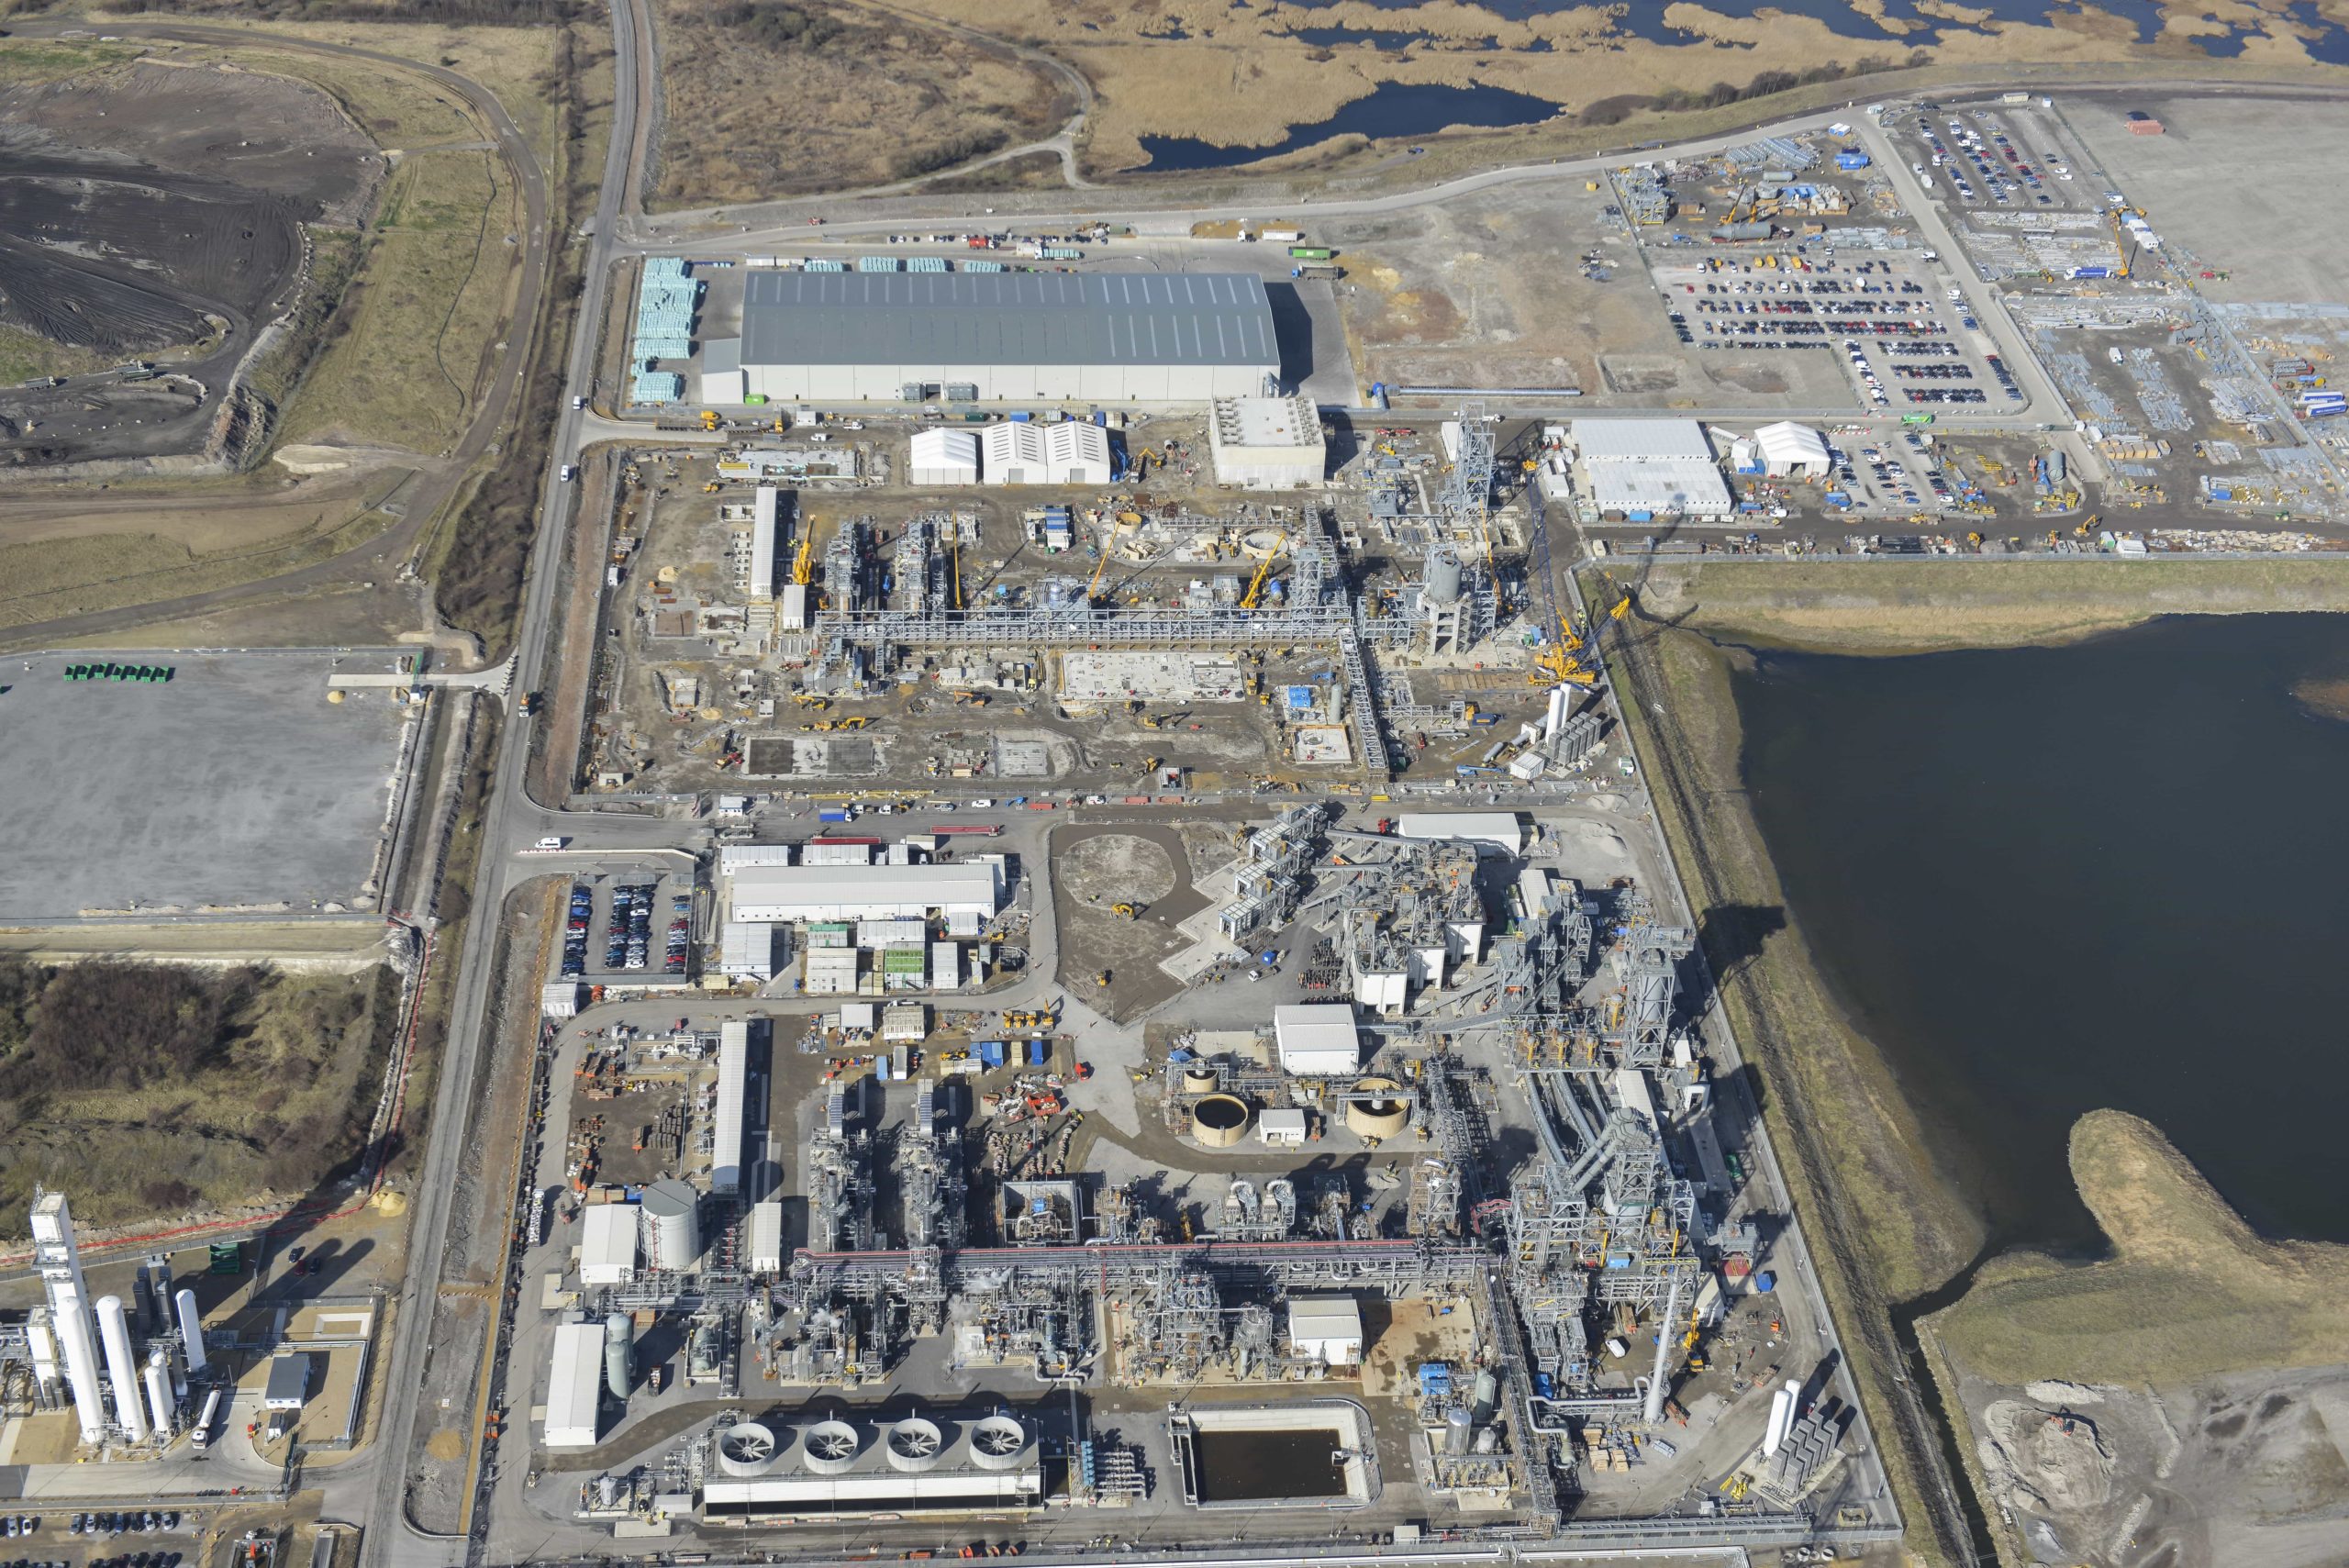 An aerial view of the Air Products' TV1 and TV2 facilities in Tees Valley